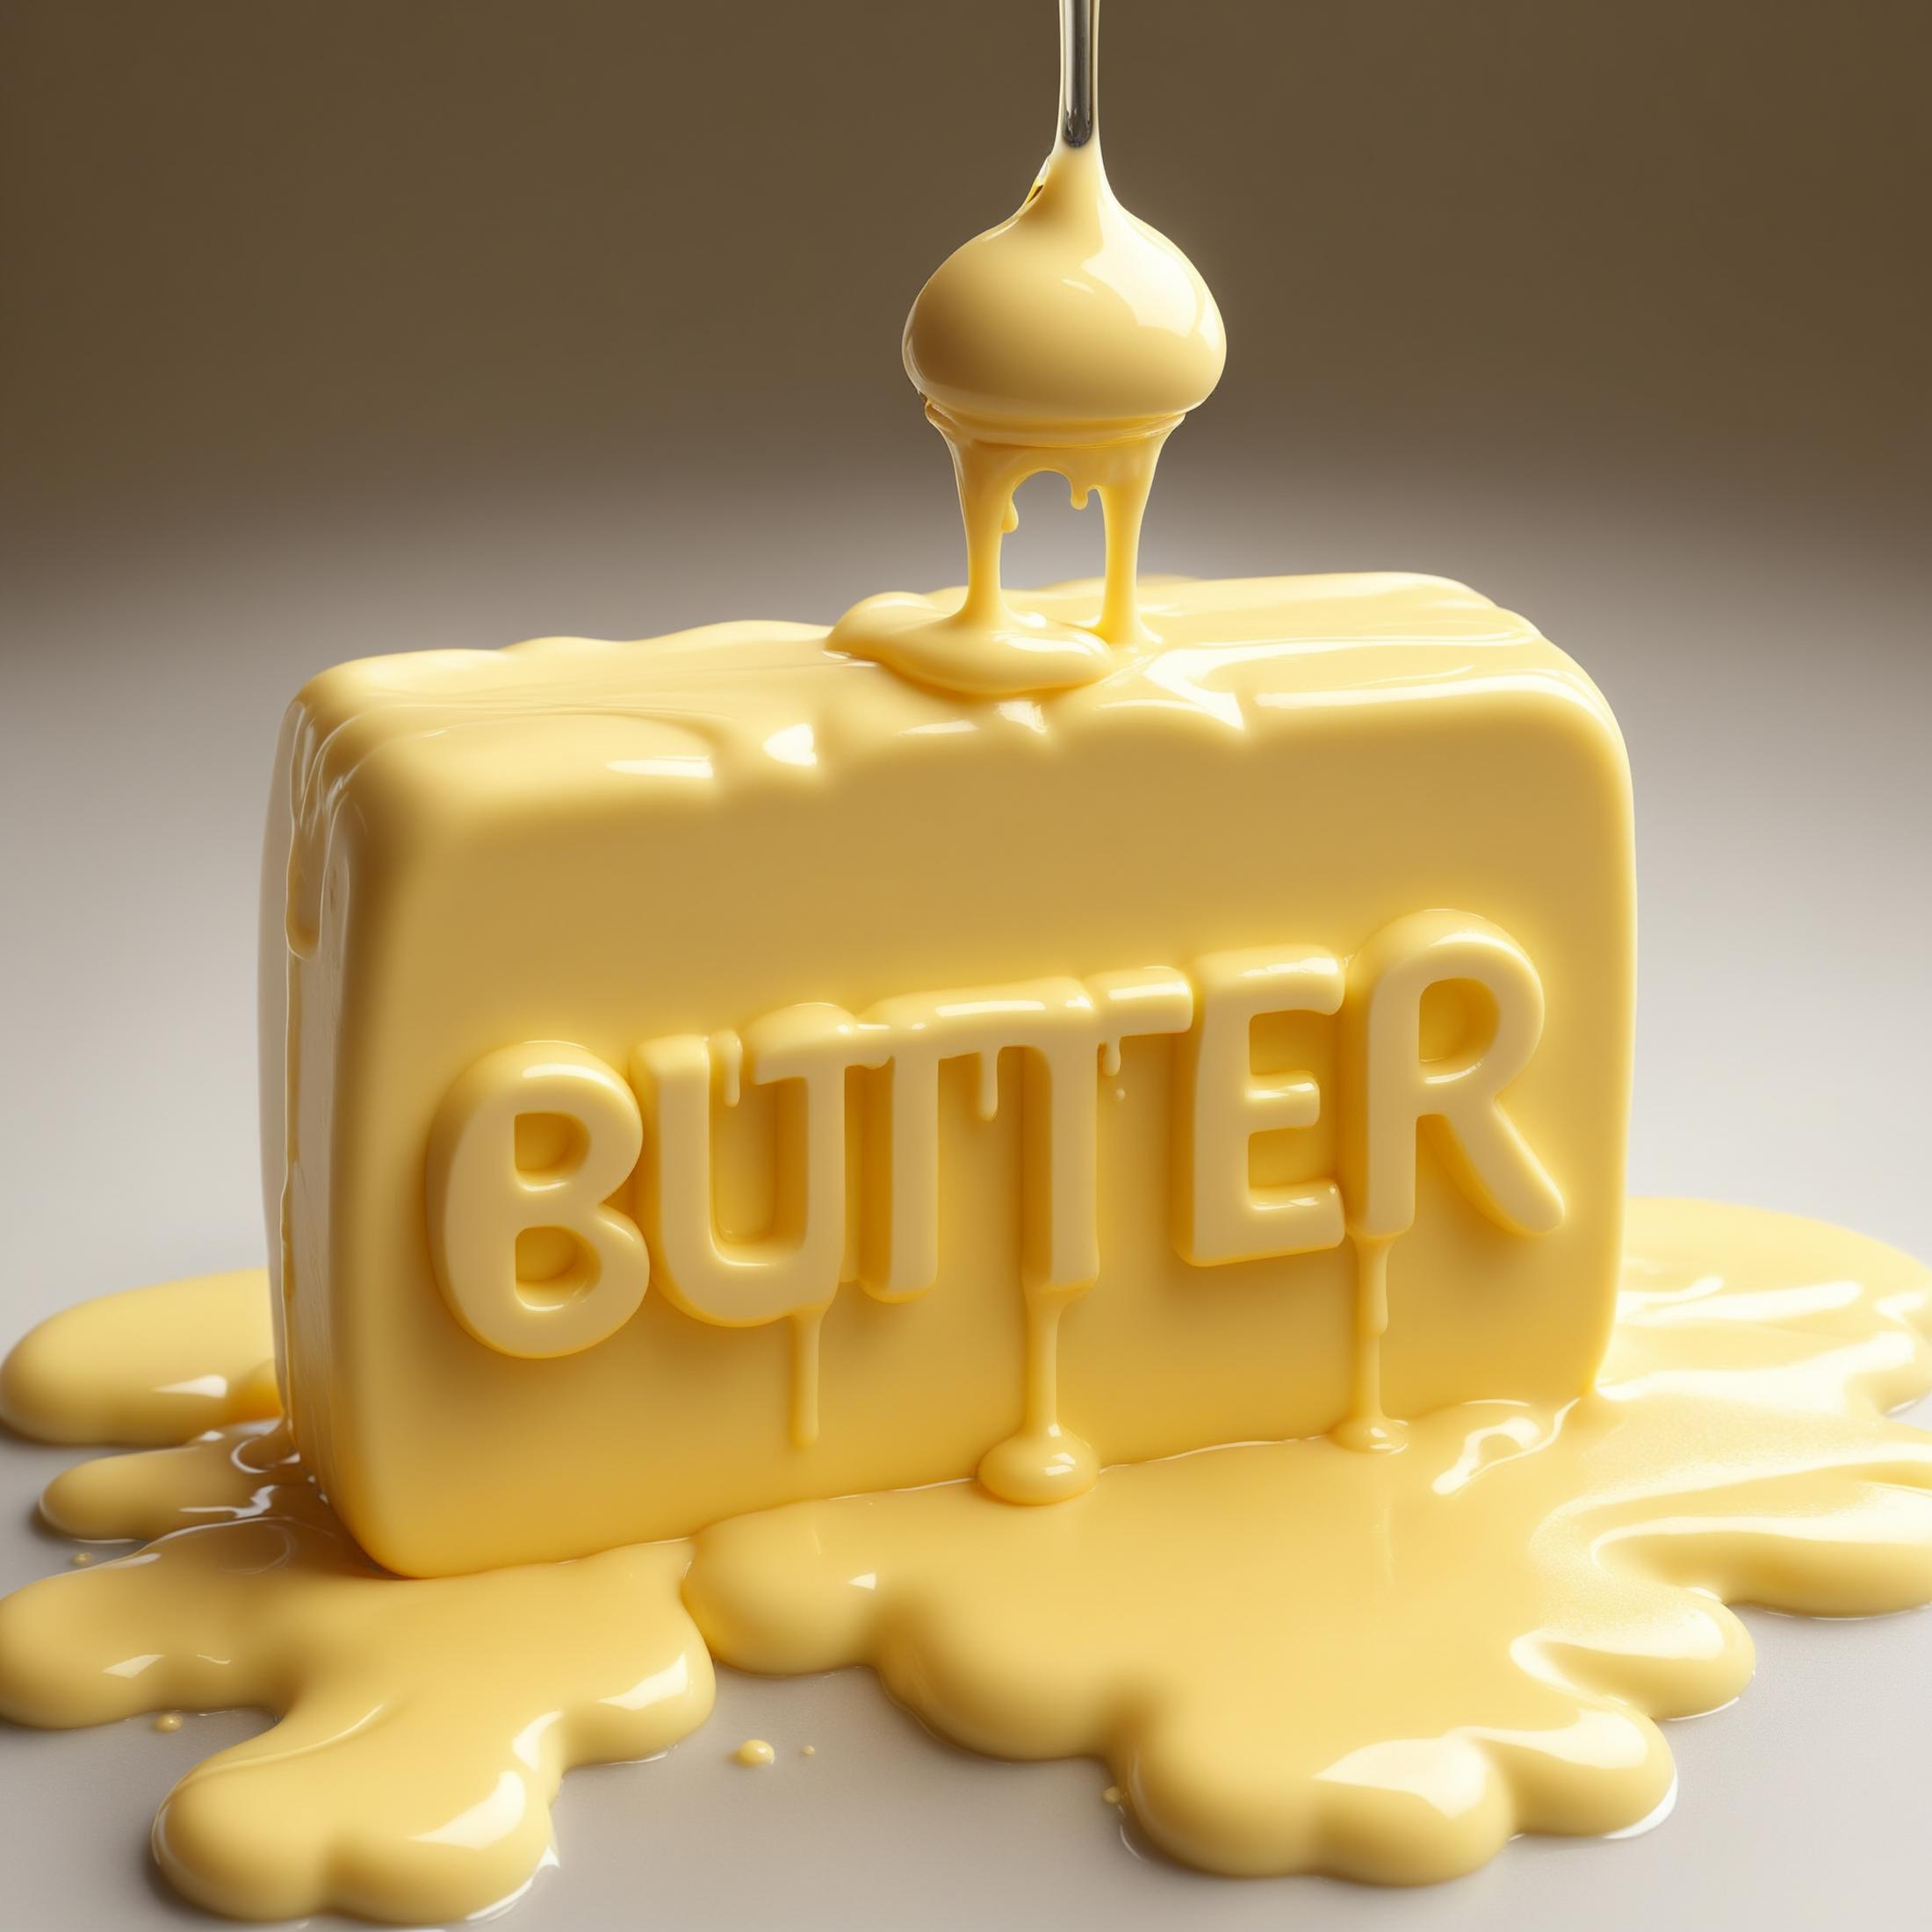 A Butter Sculpture with Yellow Butter Dripping Off of It